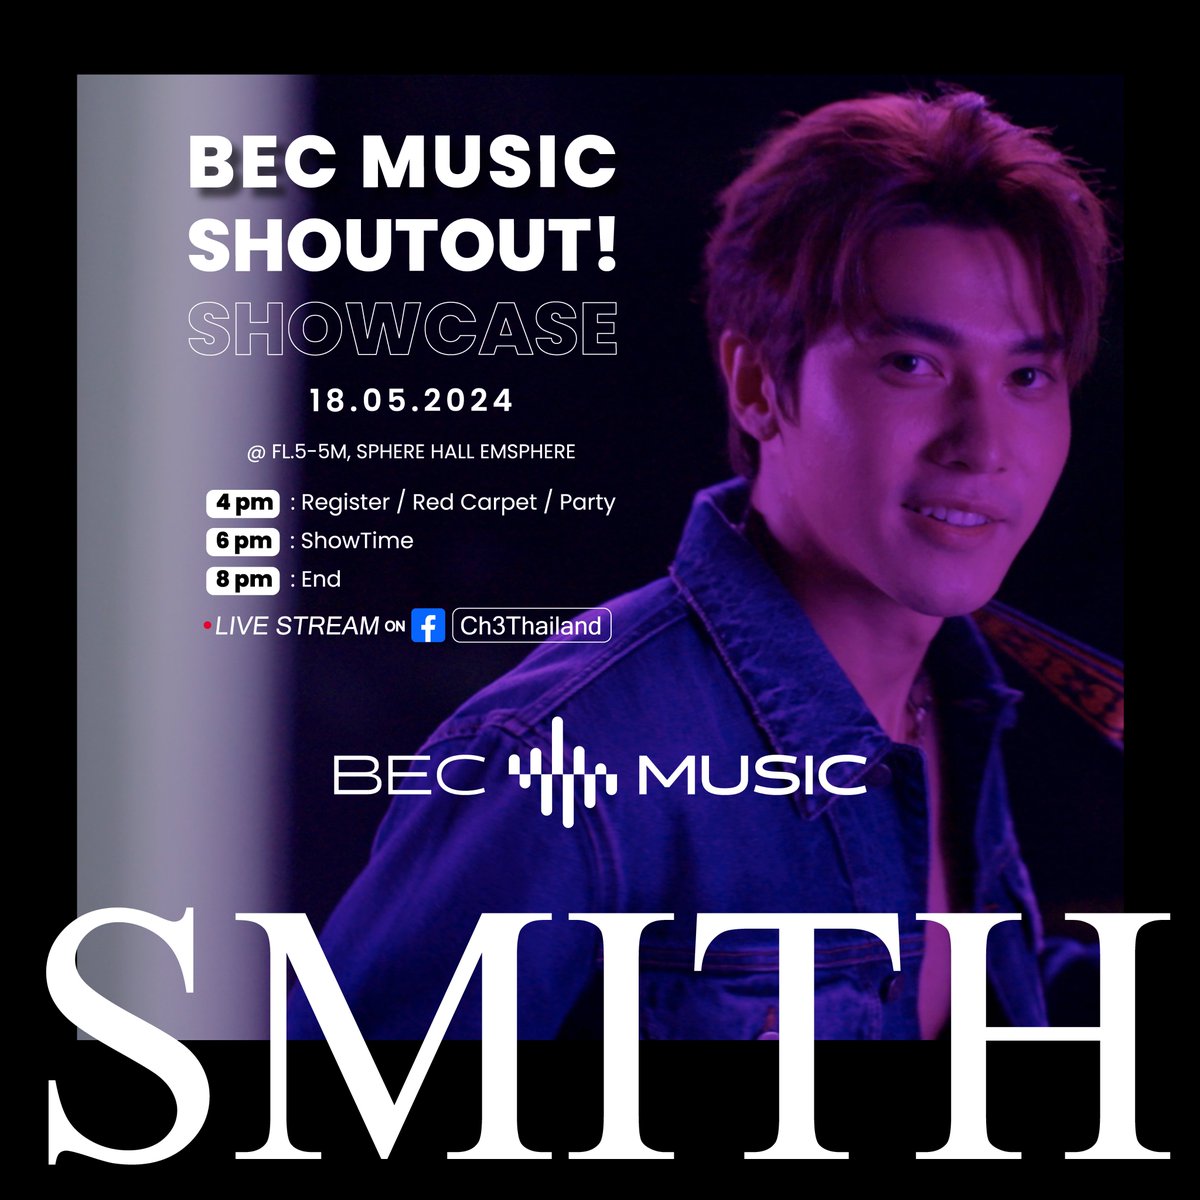 'SMITH' BEC Music Shoutout! Showcase 🎶 18.05.2024 | Sphere hall, Emsphere LIVE STREAMING on Facebook Ch3Thailand start 4 pm - 8 pm Please stay tuned! #BECMusic #SmithPaswitch #สมิธภาสวิชญ์